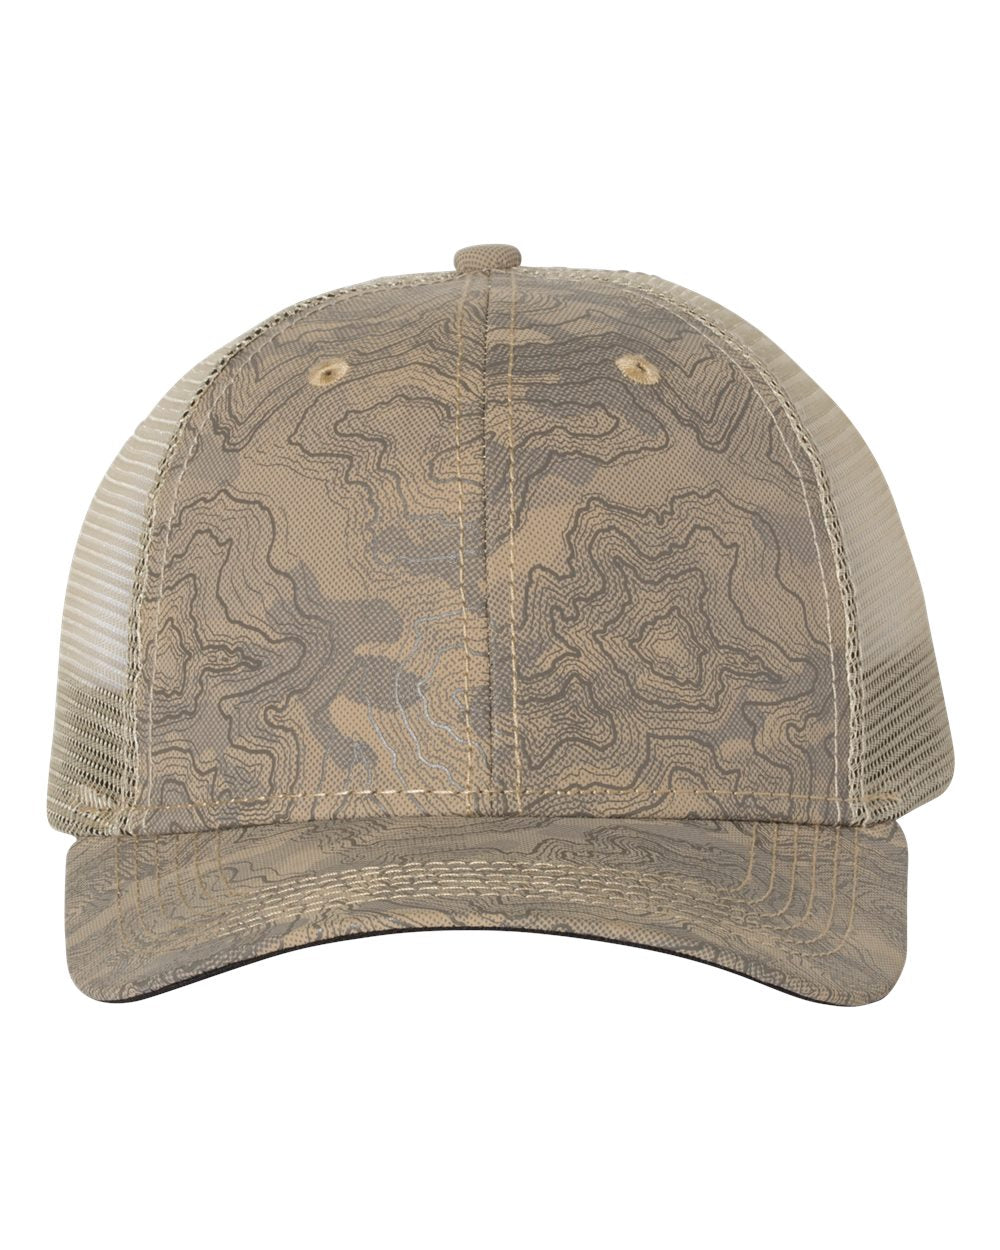 Image of the DRI DUCK Territory Trucker Cap in Khaki, showcasing its classic trucker design and khaki color, perfect for outdoor enthusiasts.